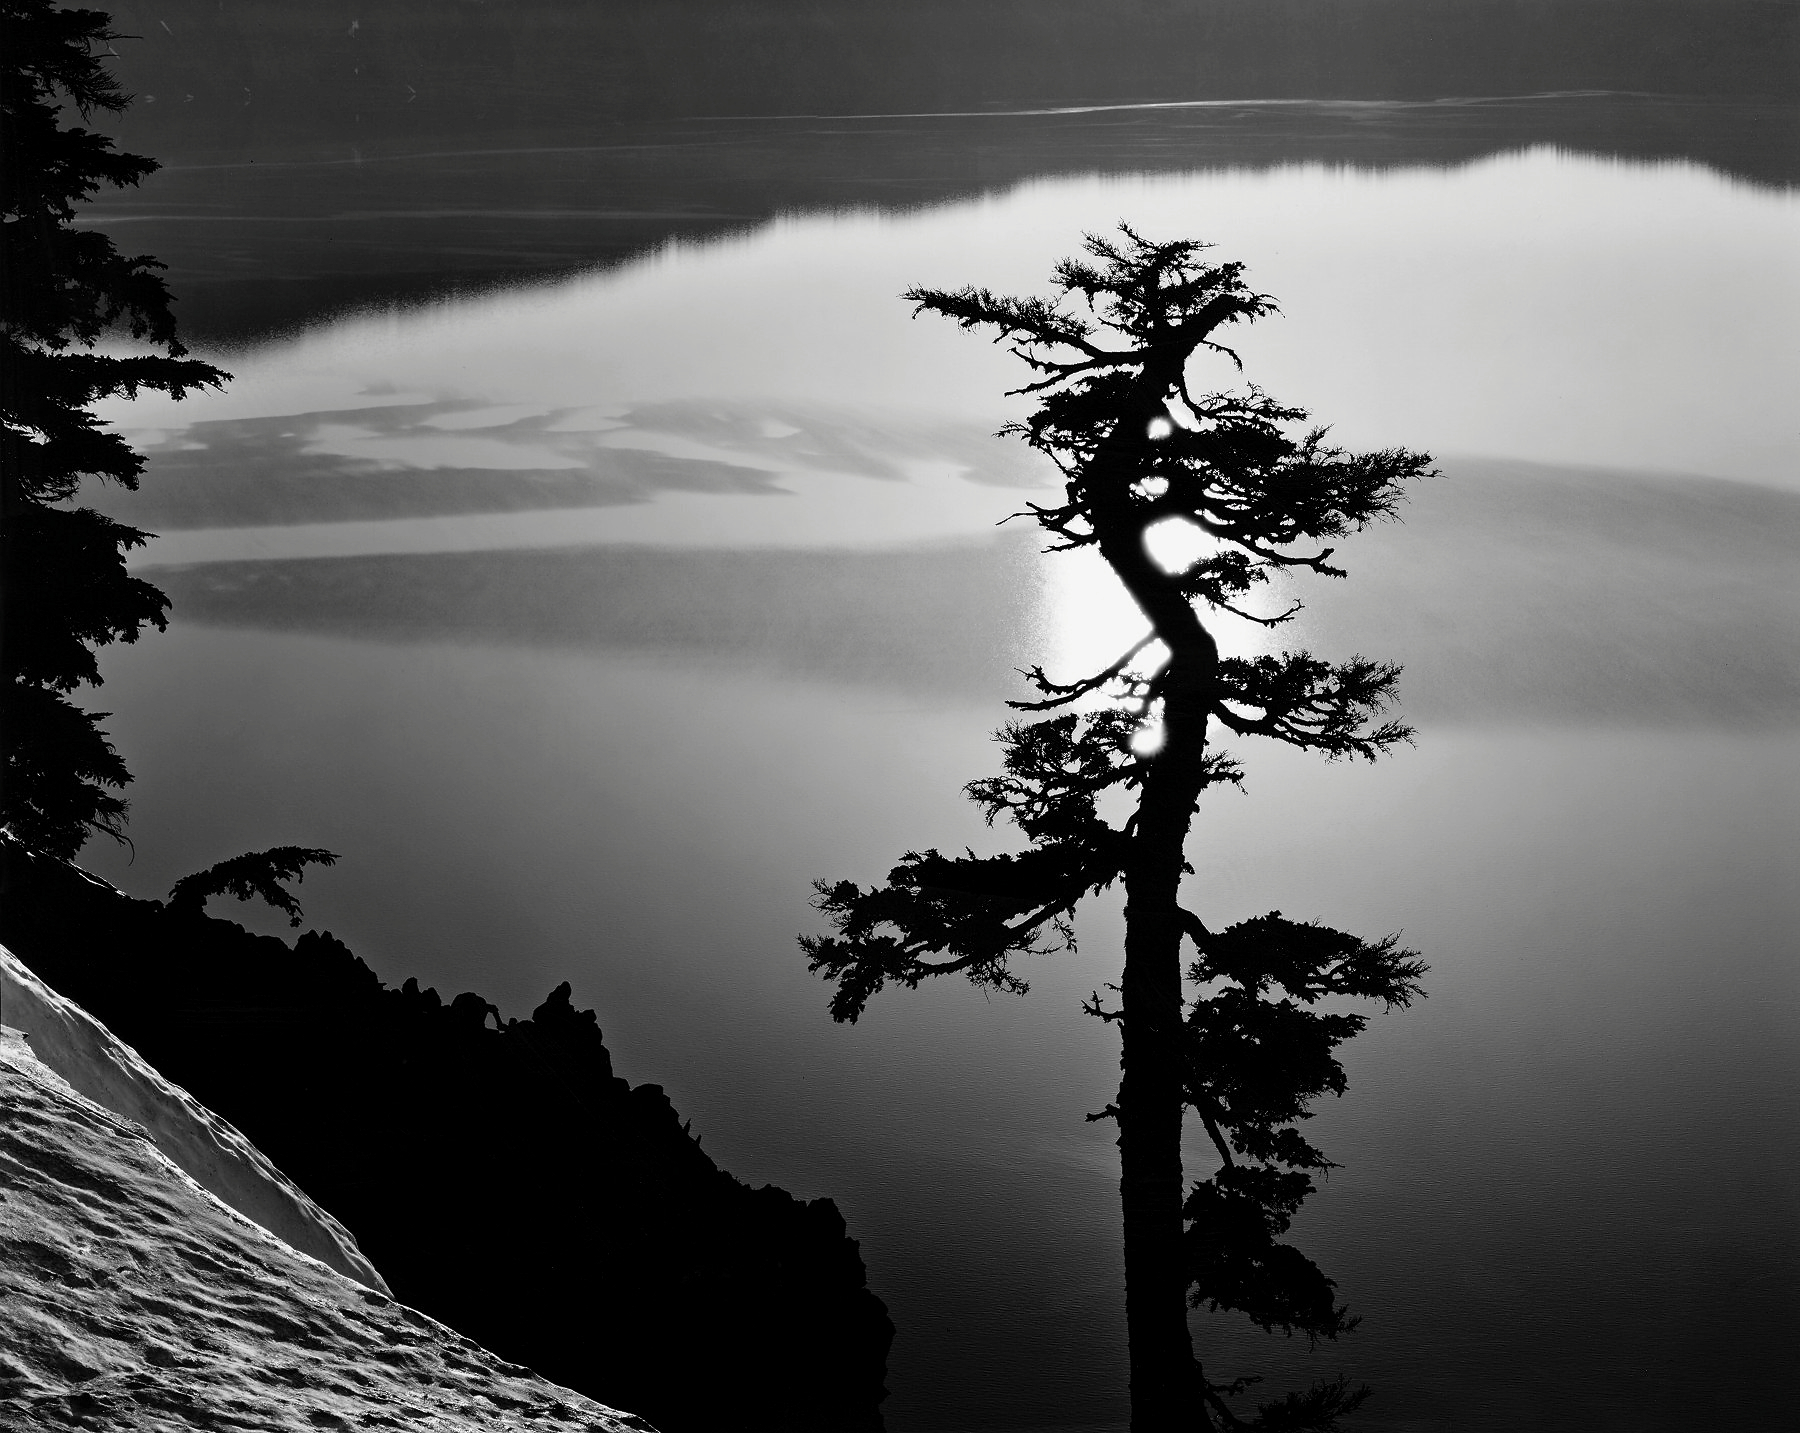 Solar Reflection, Crater Lake1985